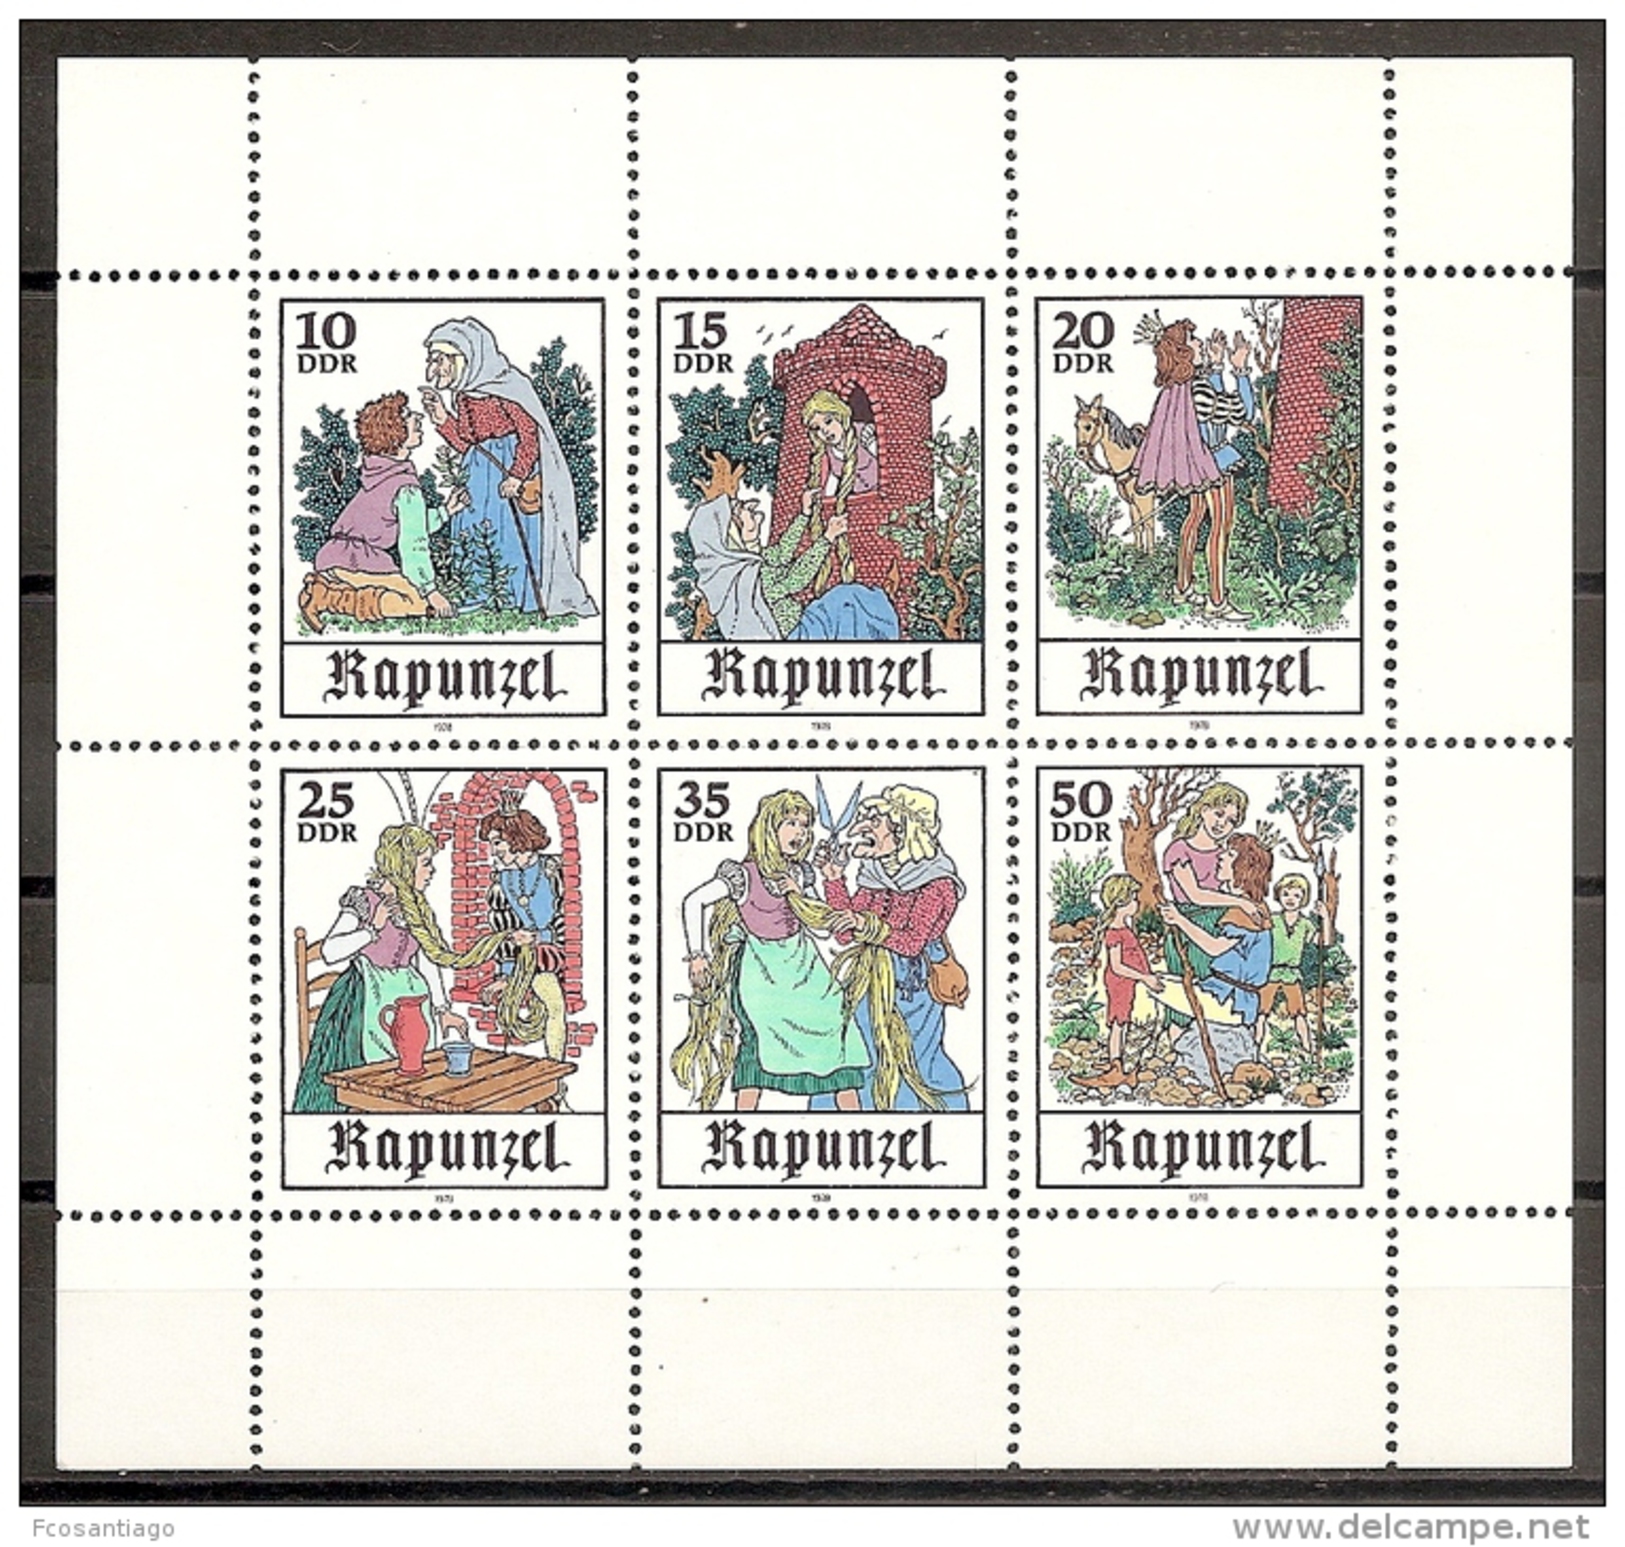 DDR 1978 - Yvert #2044/49 - MNH ** - 1st Day – FDC (sheets)